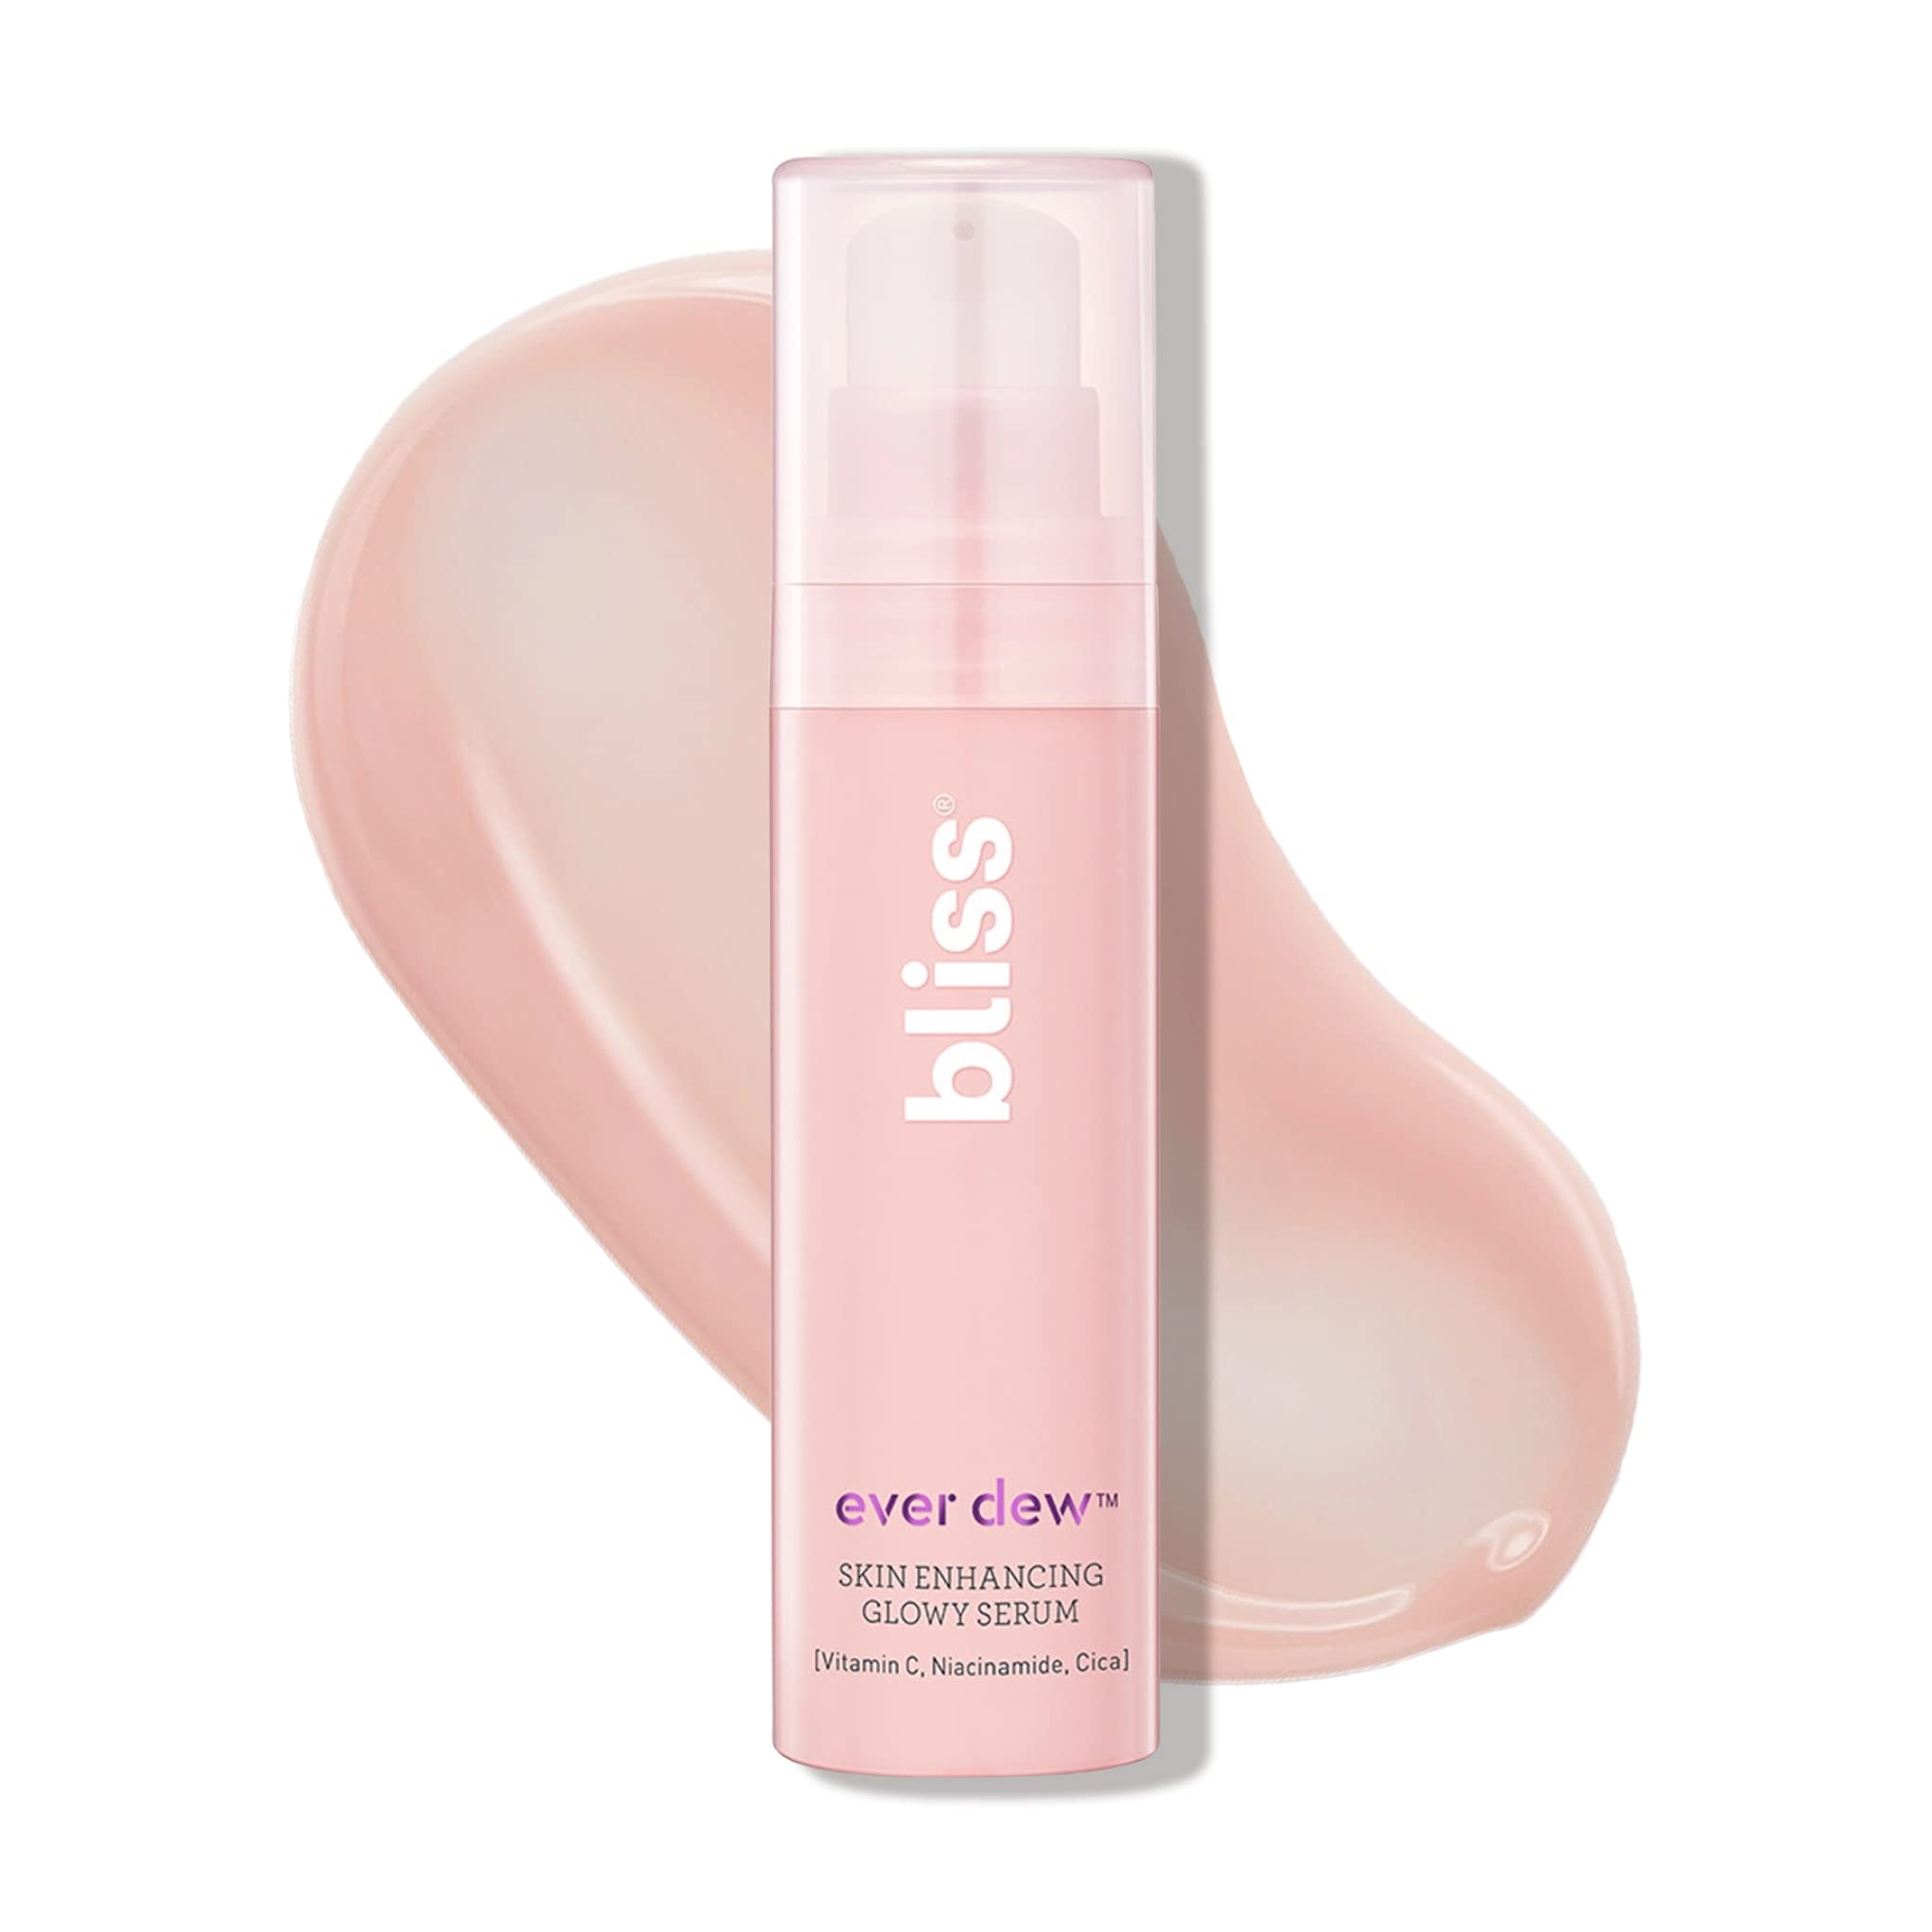 Bliss Ever Dew Skin Enhancing Glowing Serum | Radiance Booster, Primer and Liquid Highlighter